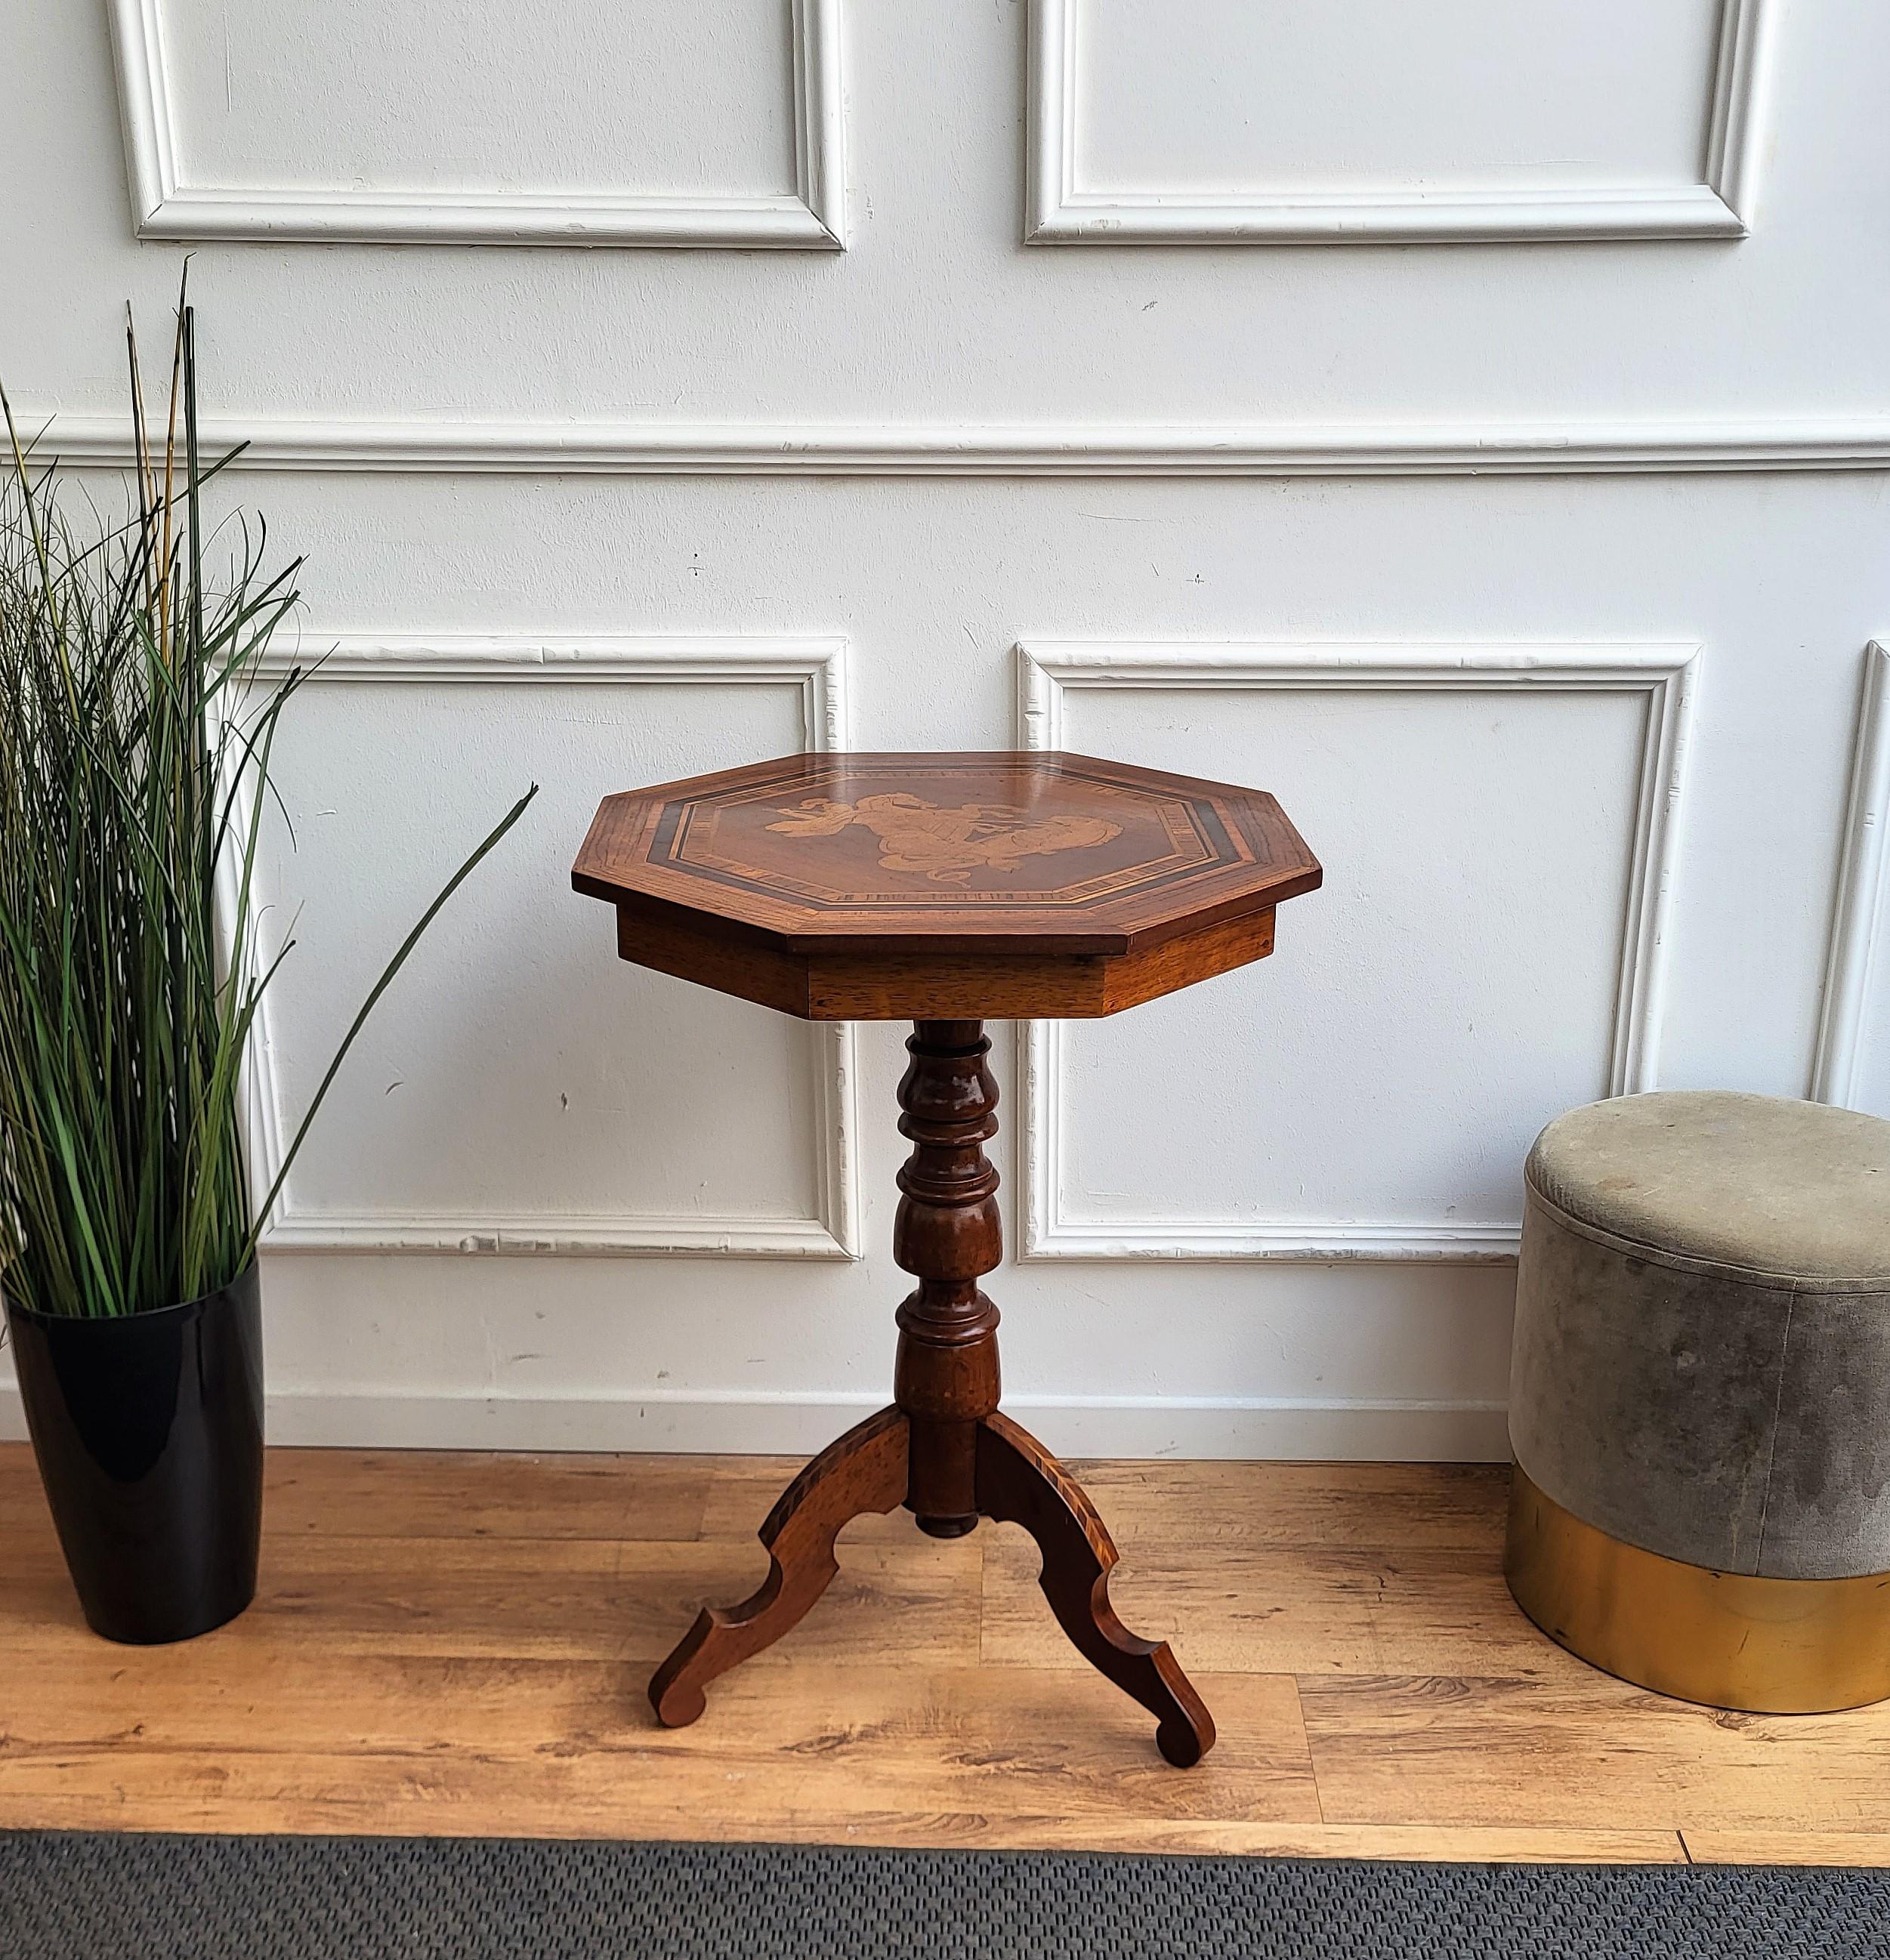 A beautiful Italian Walnut octagonal side table with great details and frames shaped in Victorian, Napoleon III, Louis XV style with beautiful inlay decors in classic figures on the top and all around the tripod feet legs. A very elegant, modern and